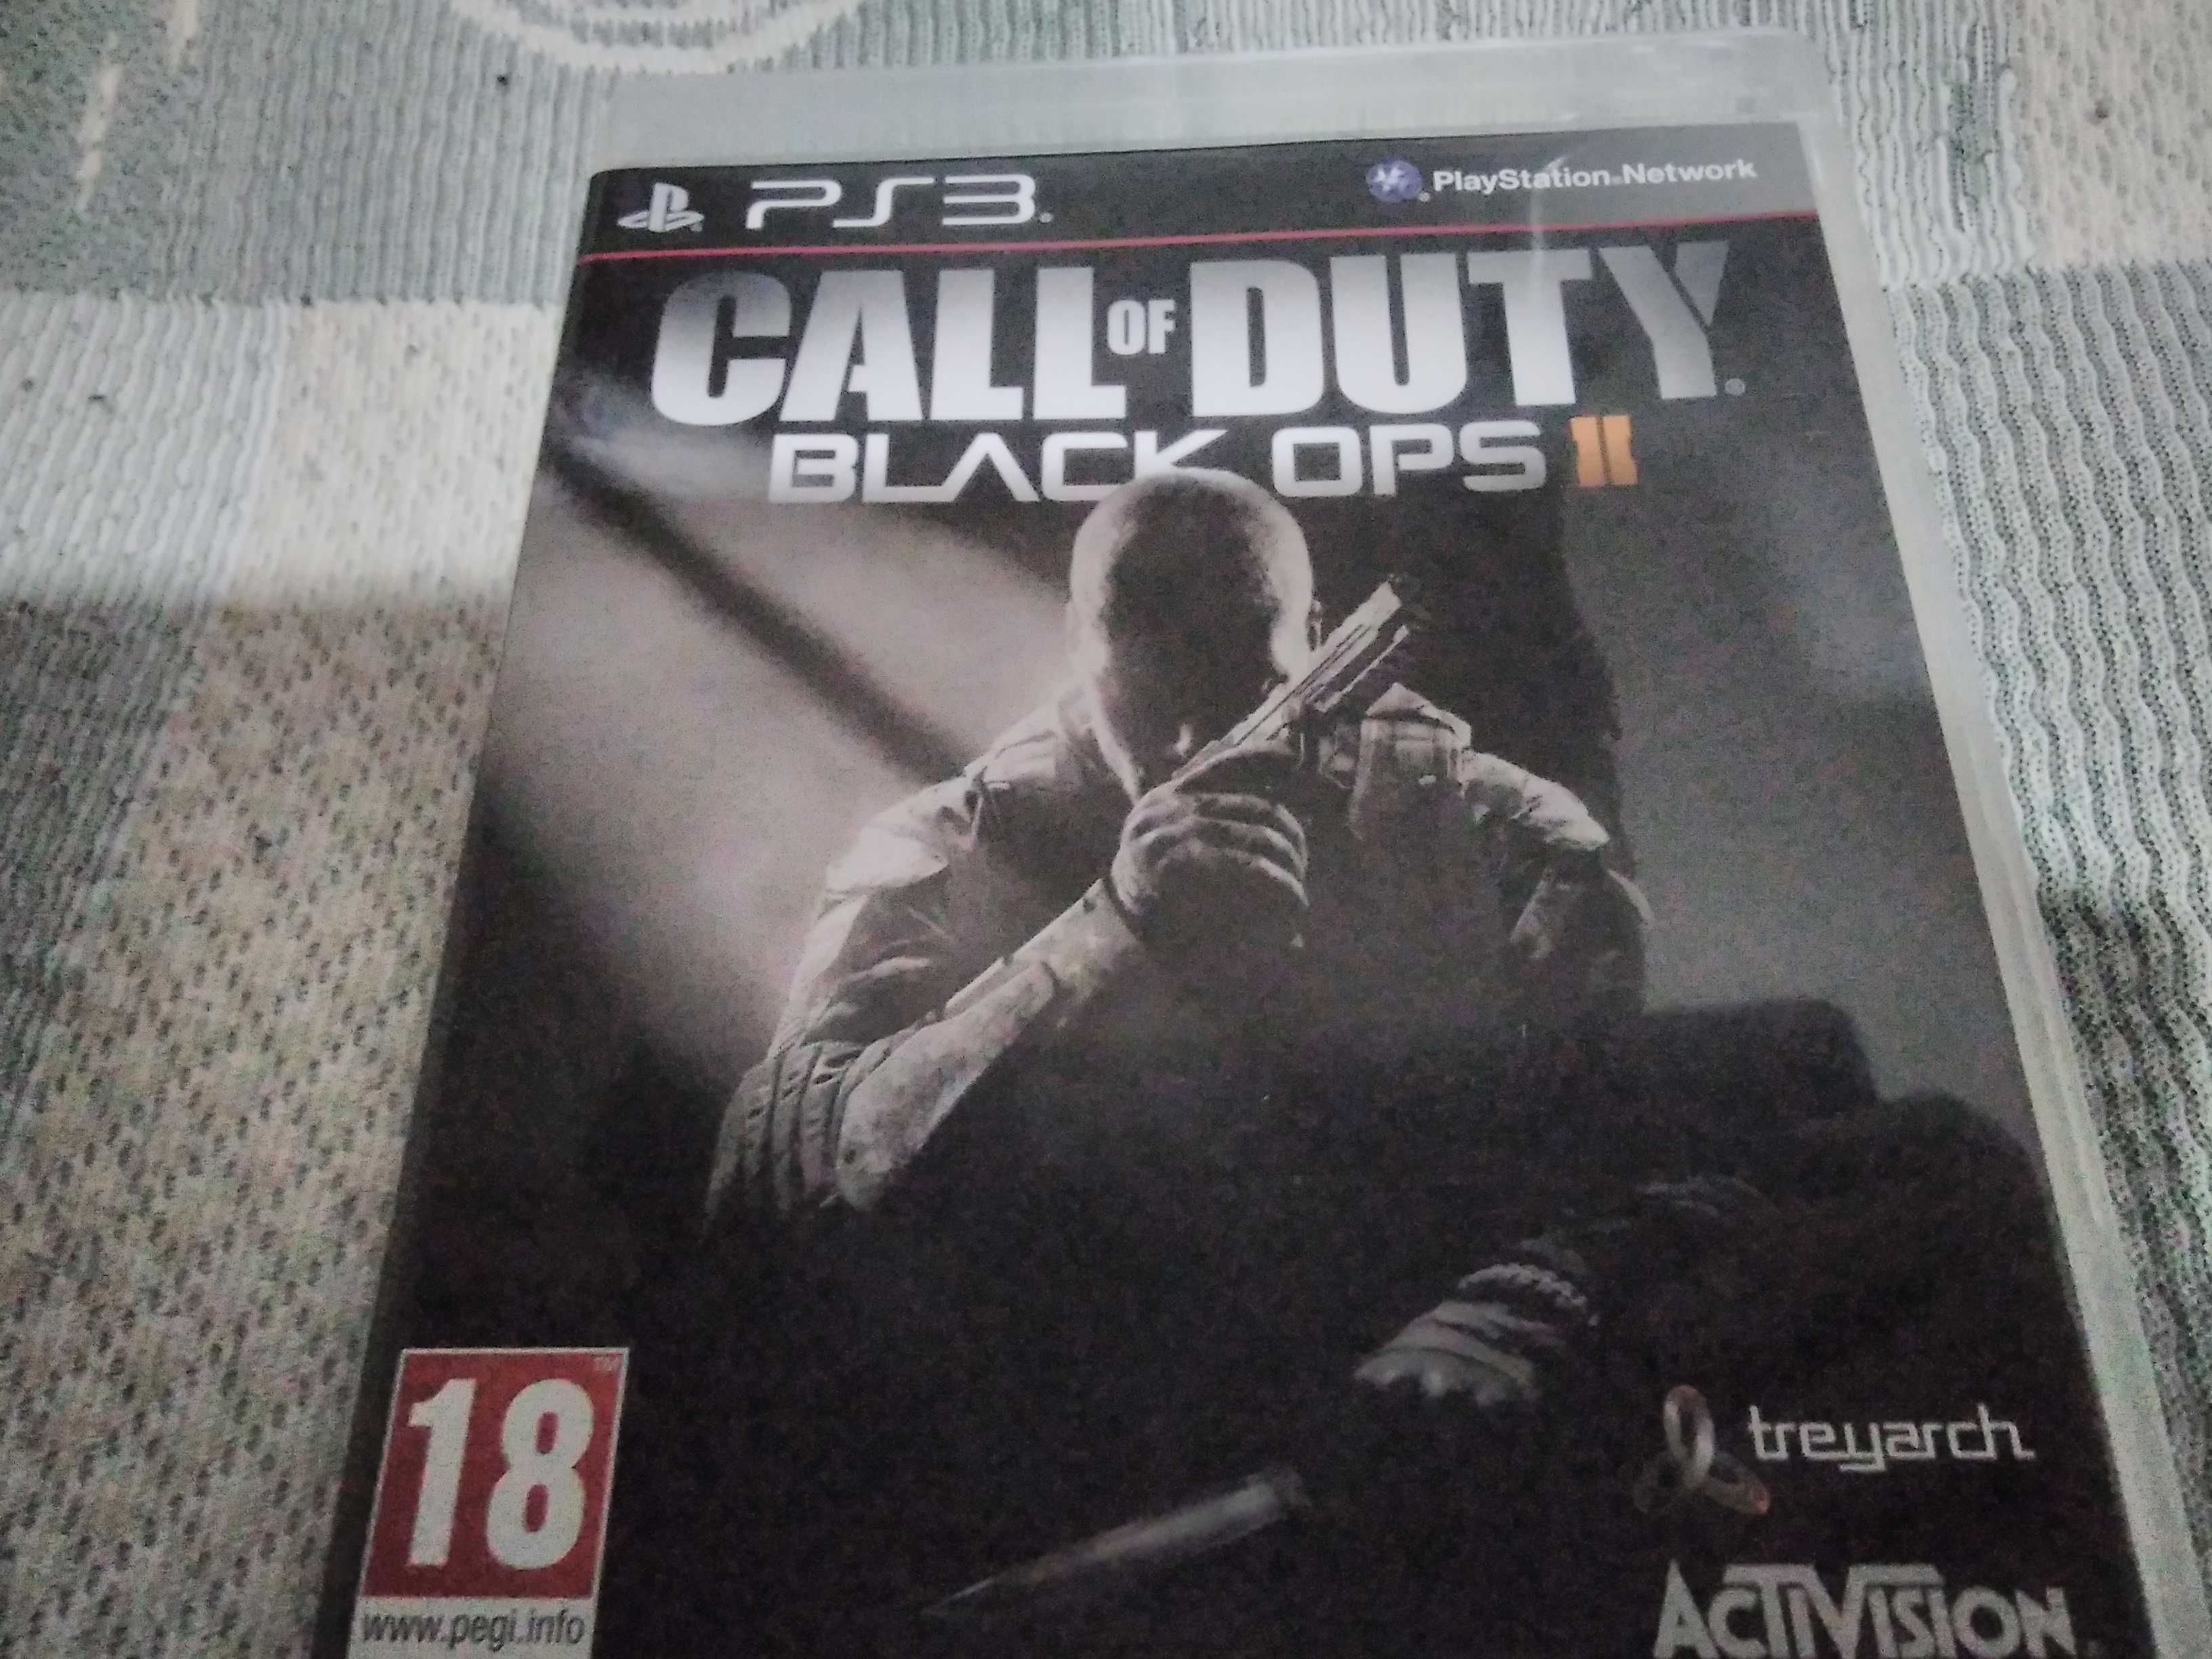 Call of duty Black Ops 2